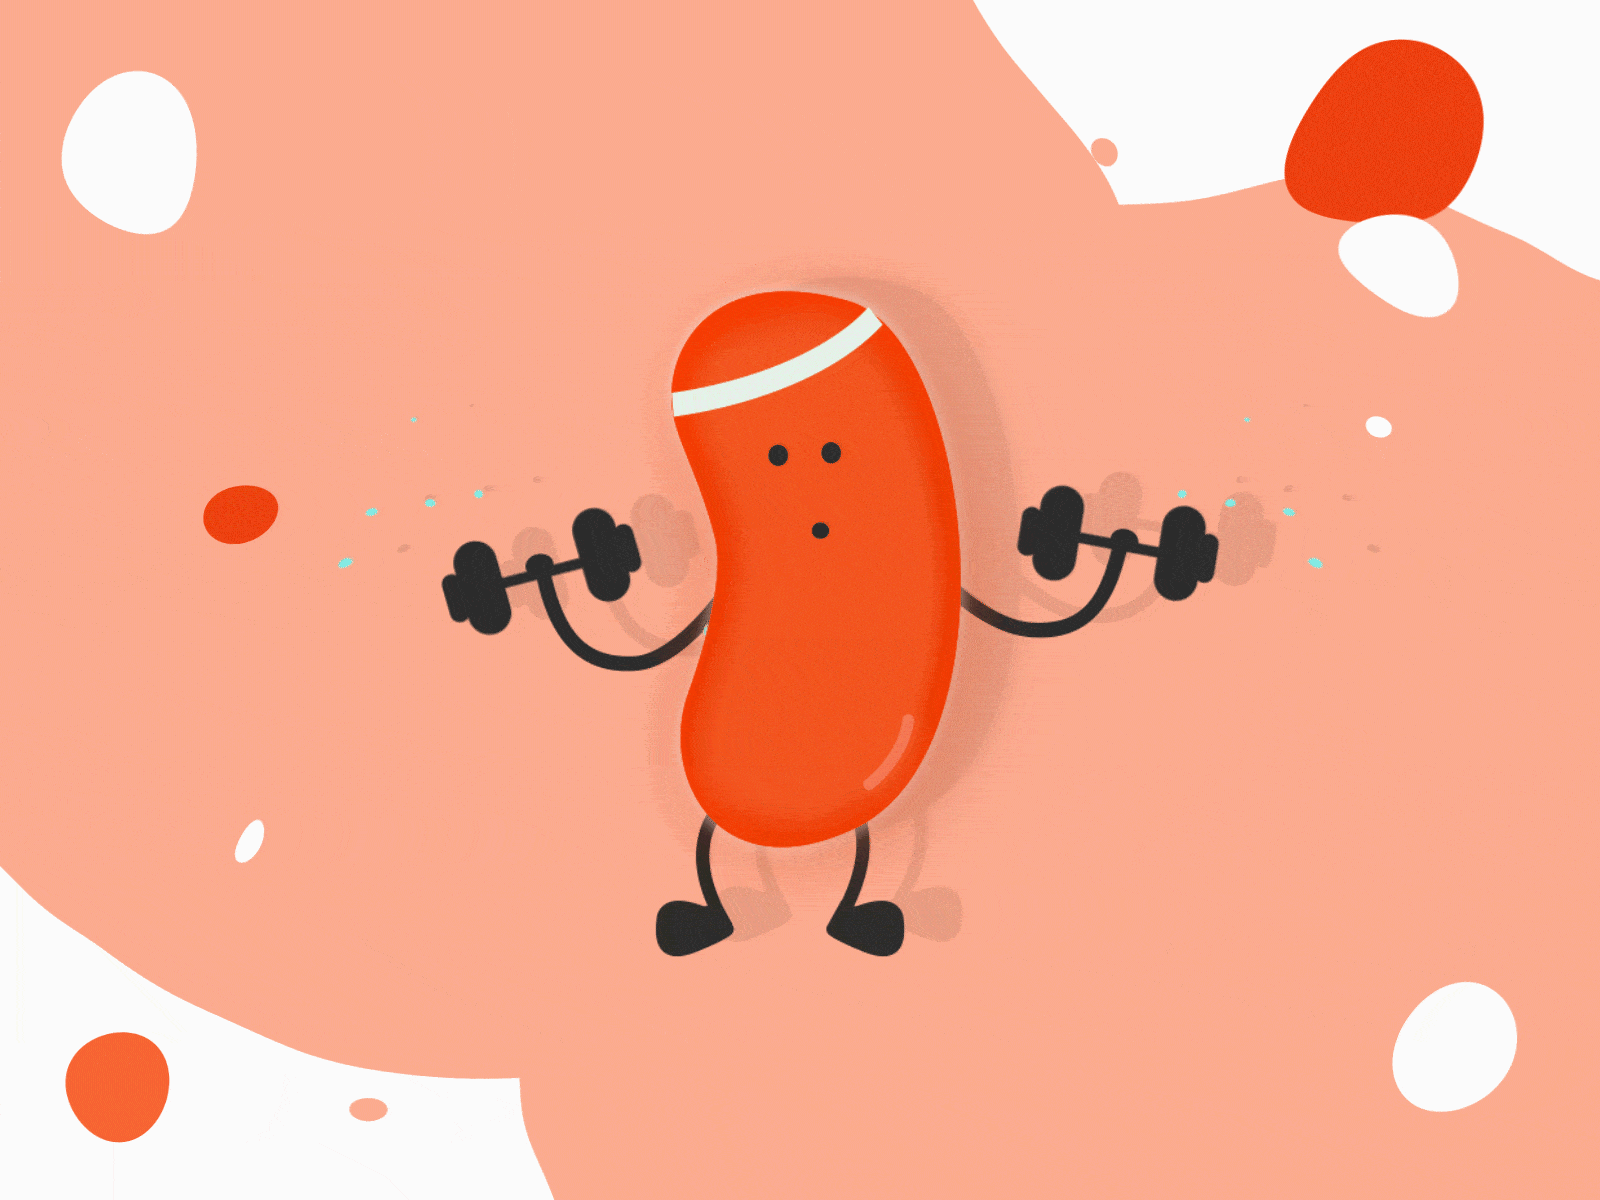 Quarantine Jelly Bean Keeping Lean after affects animation design illustration jellybean quarantine working out